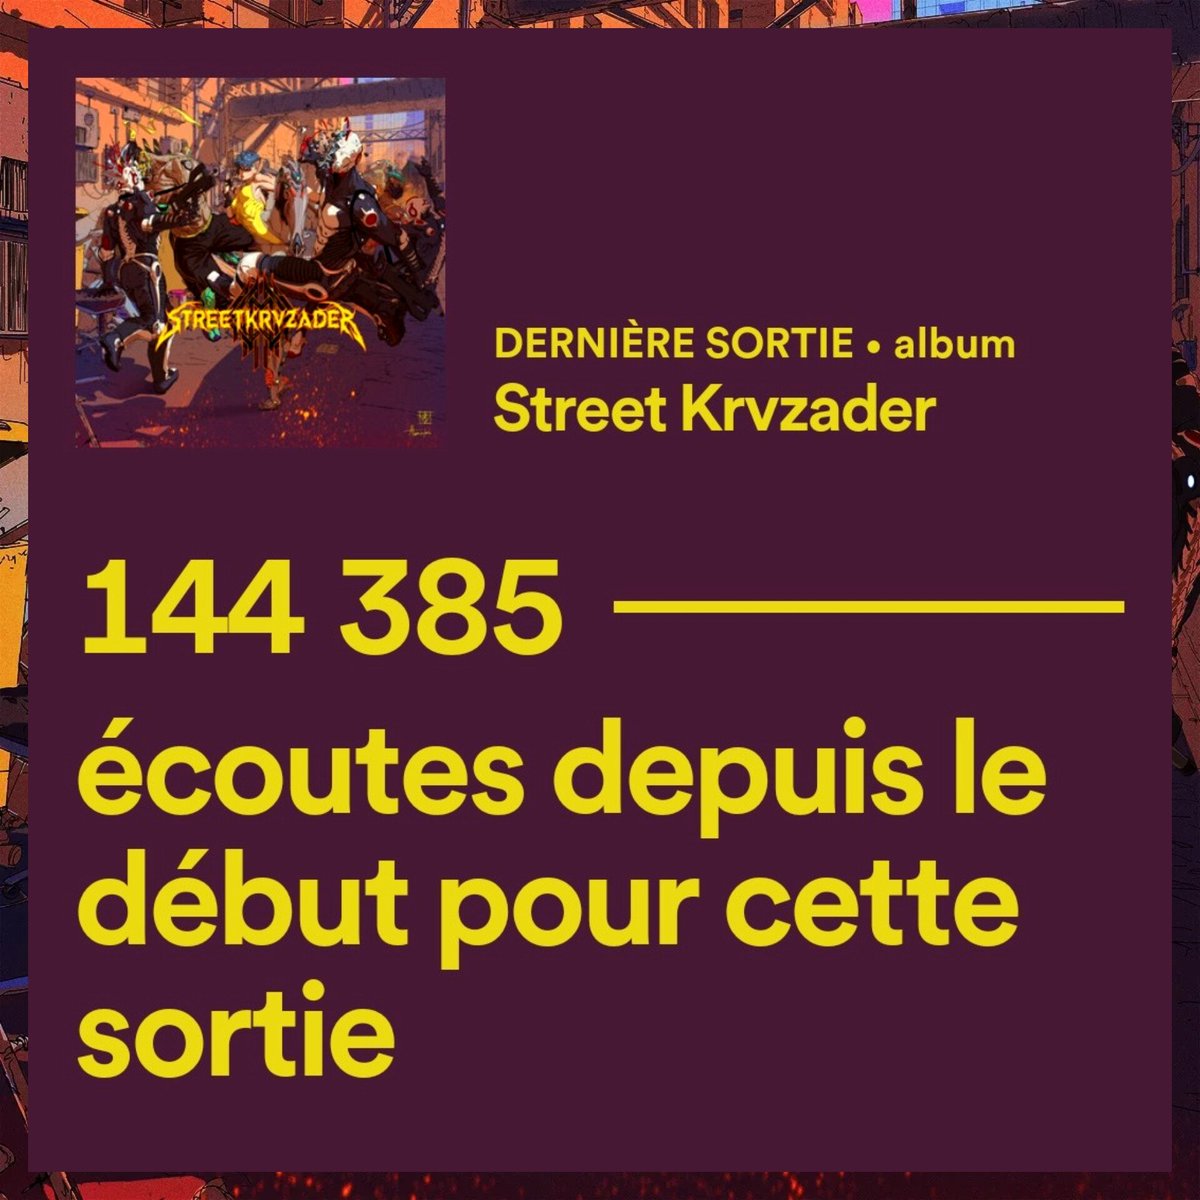 Over 140k streams for STREET KRVZADER! Thanks everyone for your amazing support! 🔥 👊 🔥